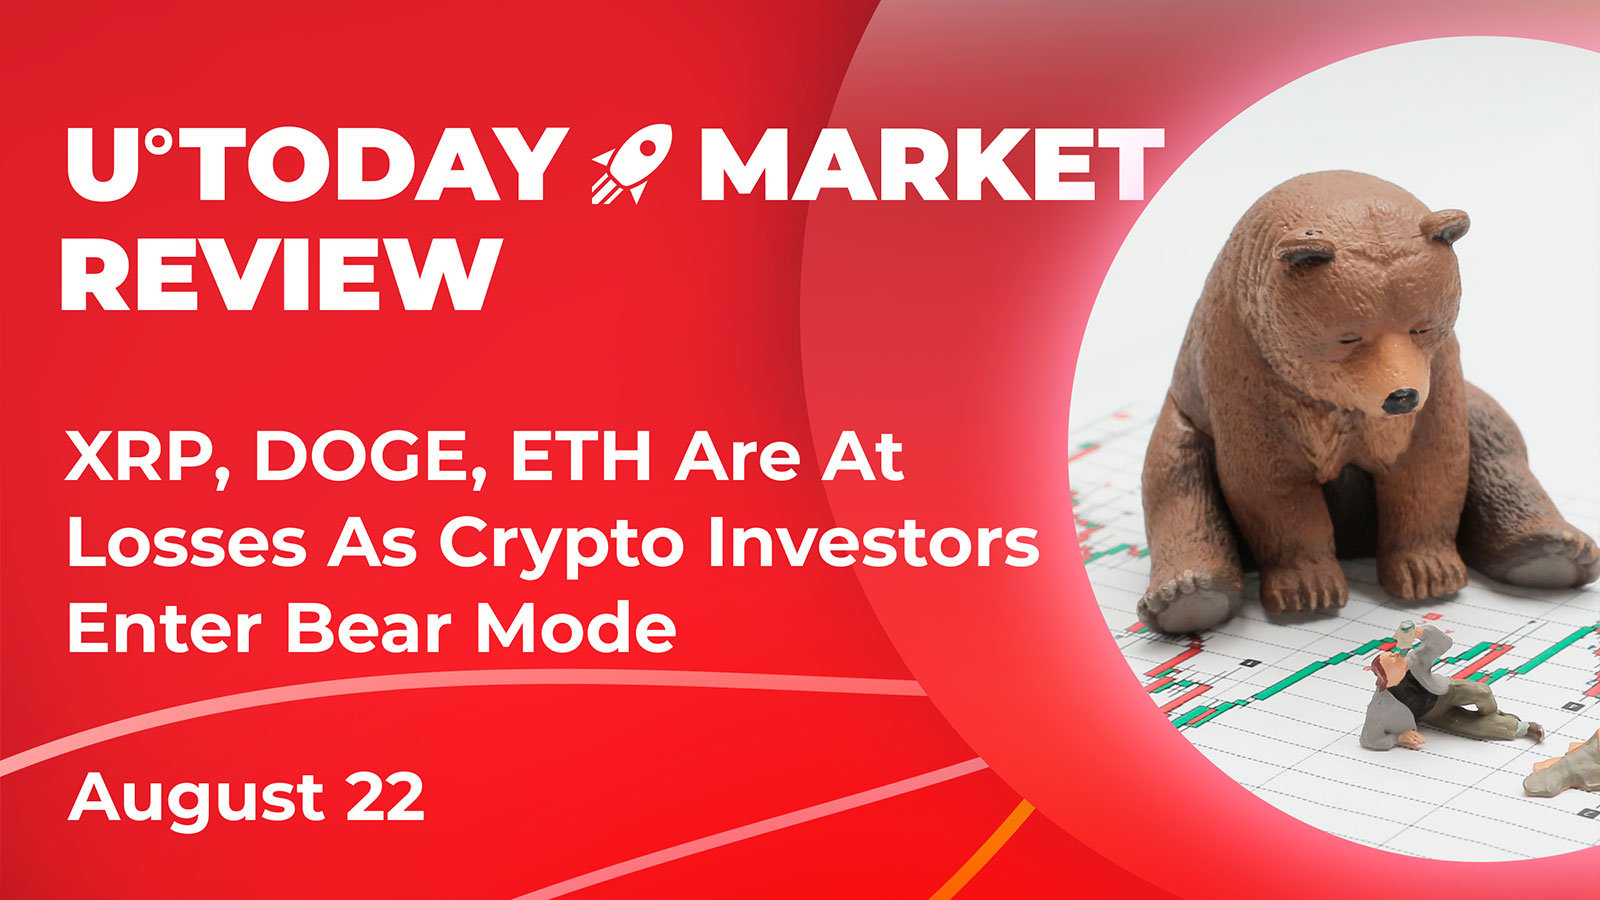 XRP, DOGE, ETH Are At Losses As Crypto Investors Enter Bear Mode: Crypto Market Review, August 22